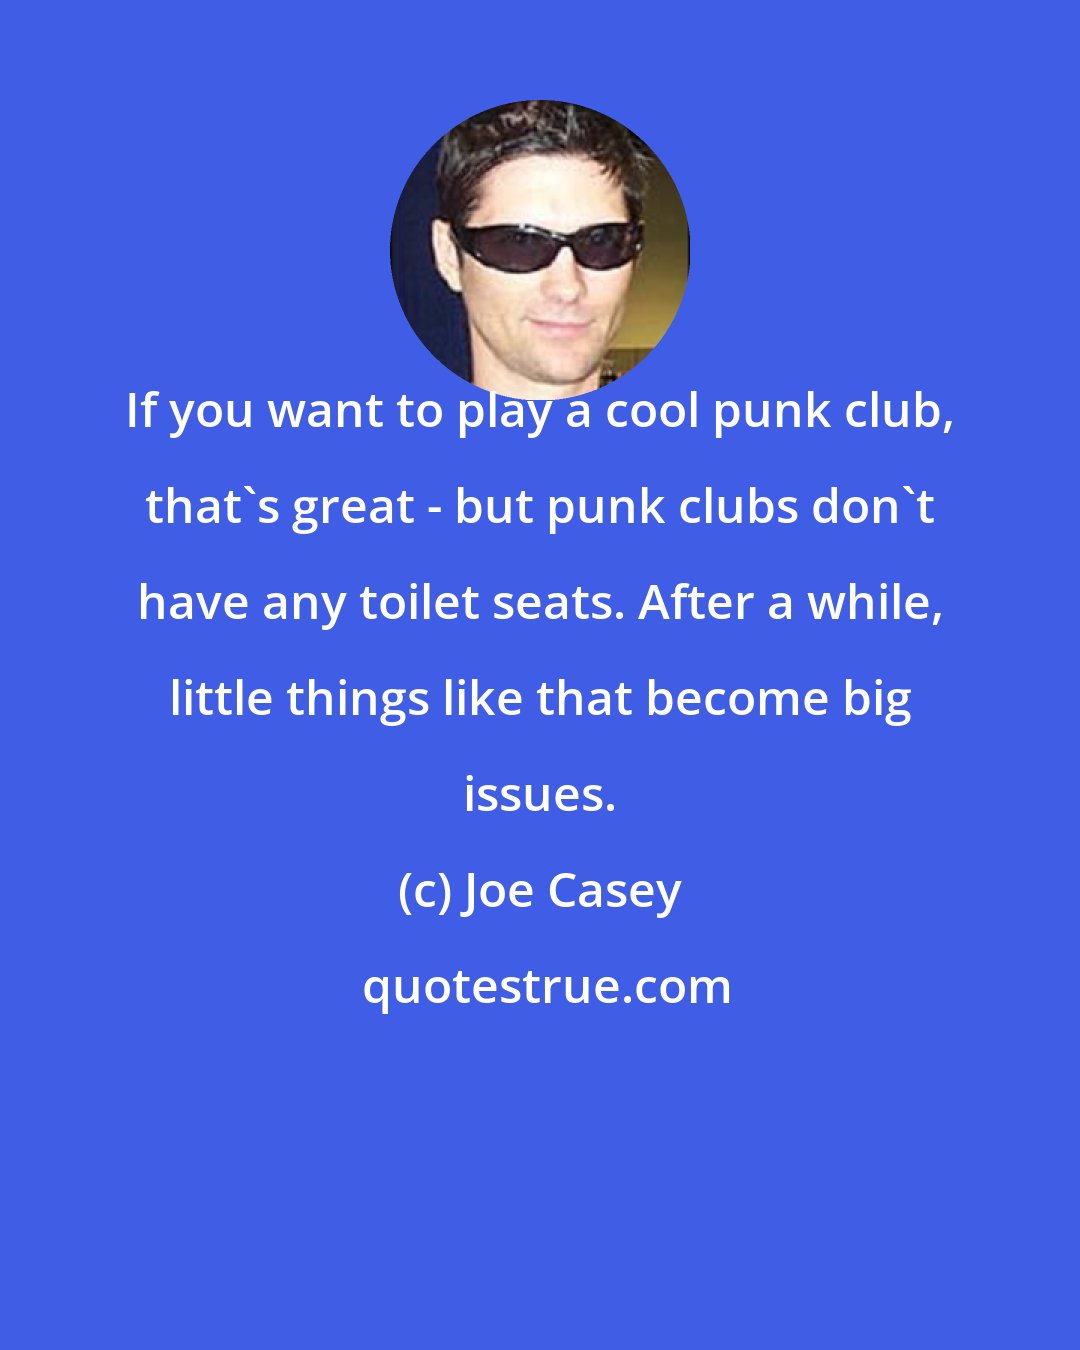 Joe Casey: If you want to play a cool punk club, that's great - but punk clubs don't have any toilet seats. After a while, little things like that become big issues.